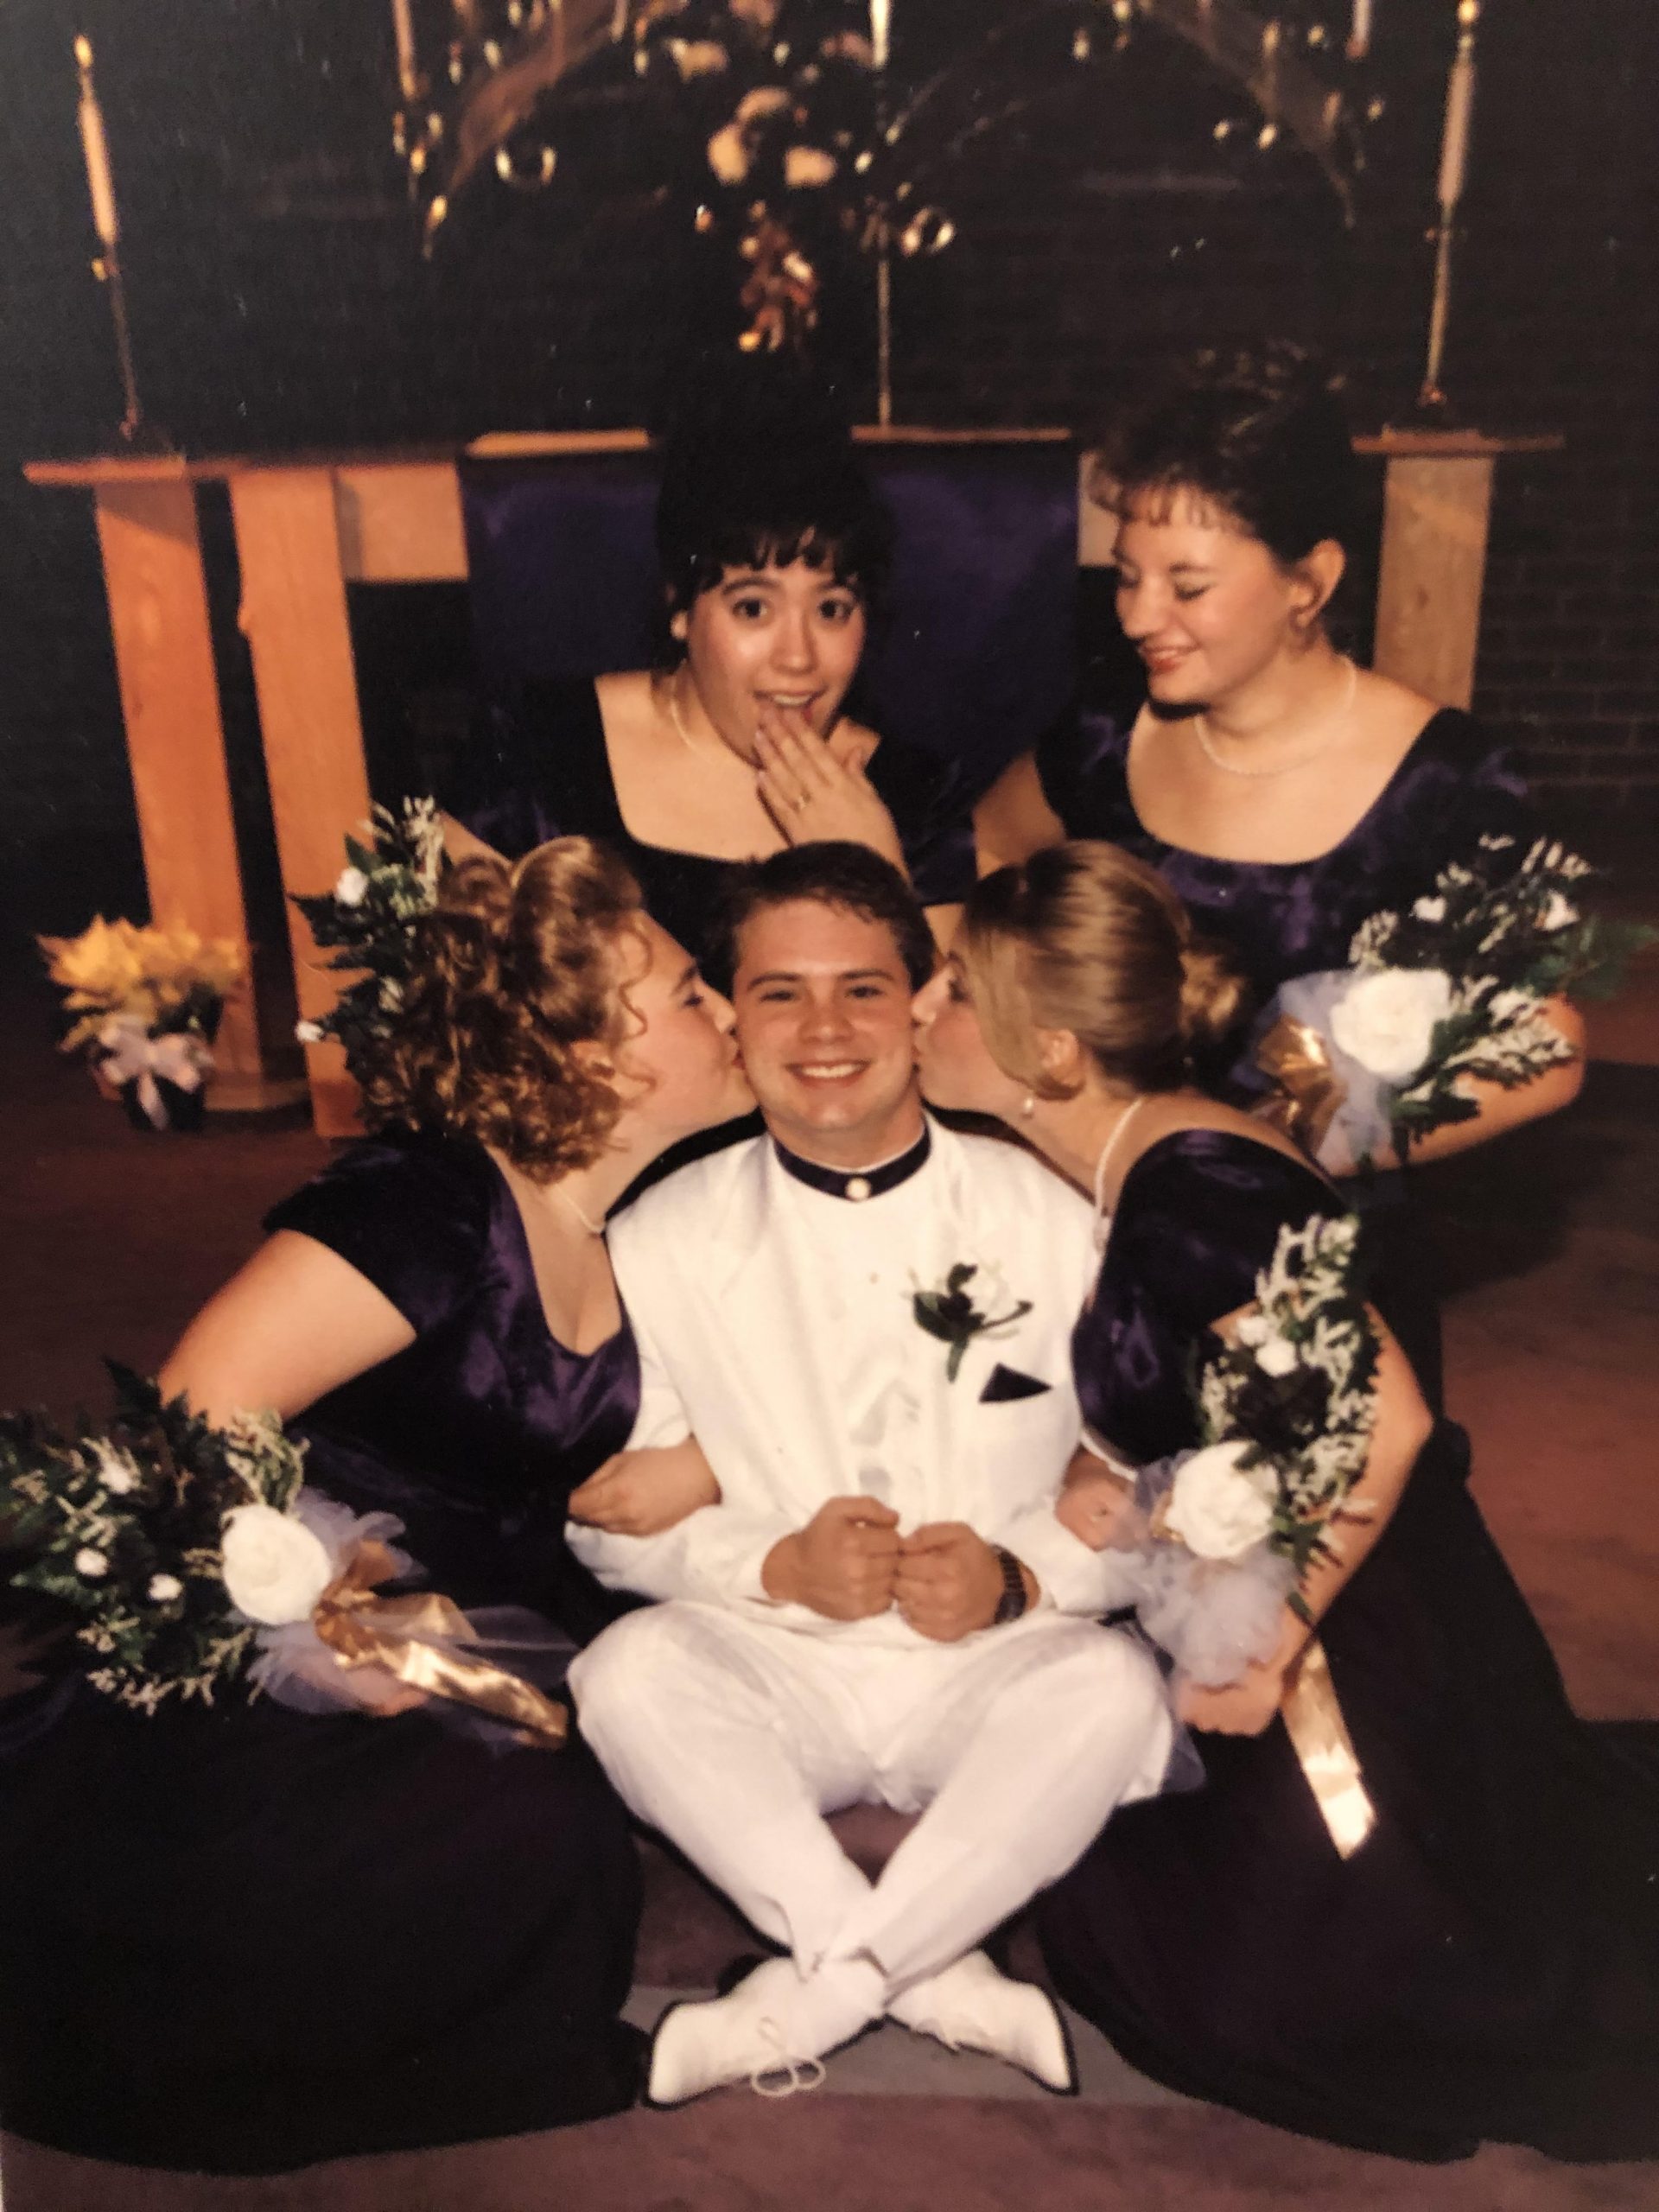 Maria (top left) and Greg were both in Chris (center) and Peggy’s 1997 wedding...